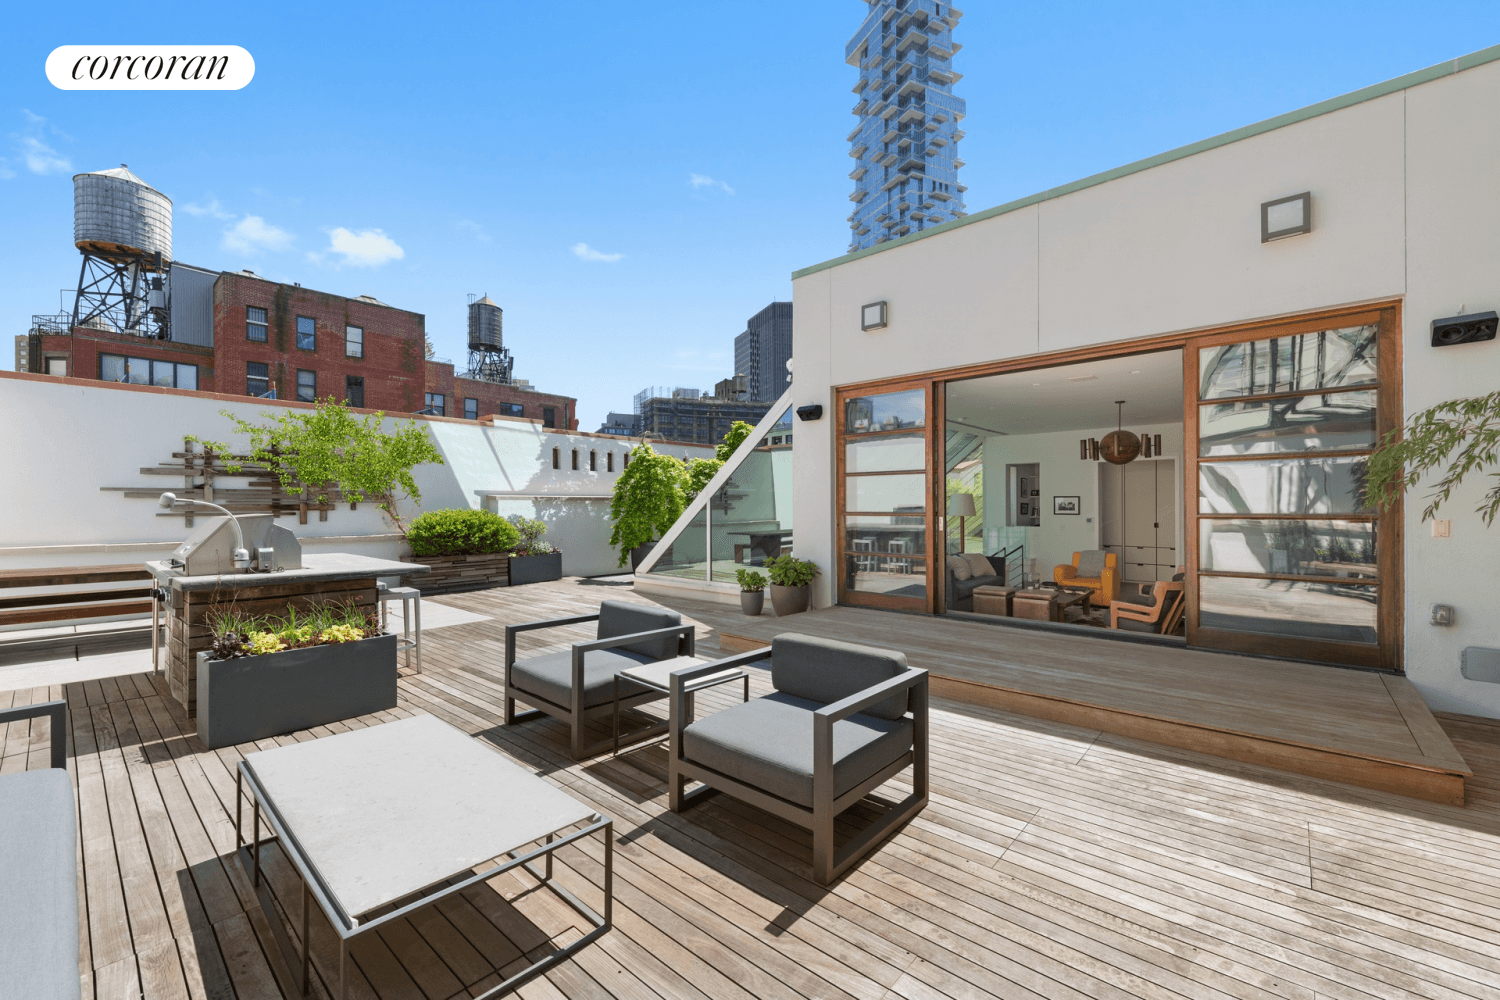 Sun kissed luxury penthouse living awaits in this sprawling three bedroom, four and a half bathroom duplex loft featuring exquisite industrial meets modern interiors and a massive rooftop terrace atop ...